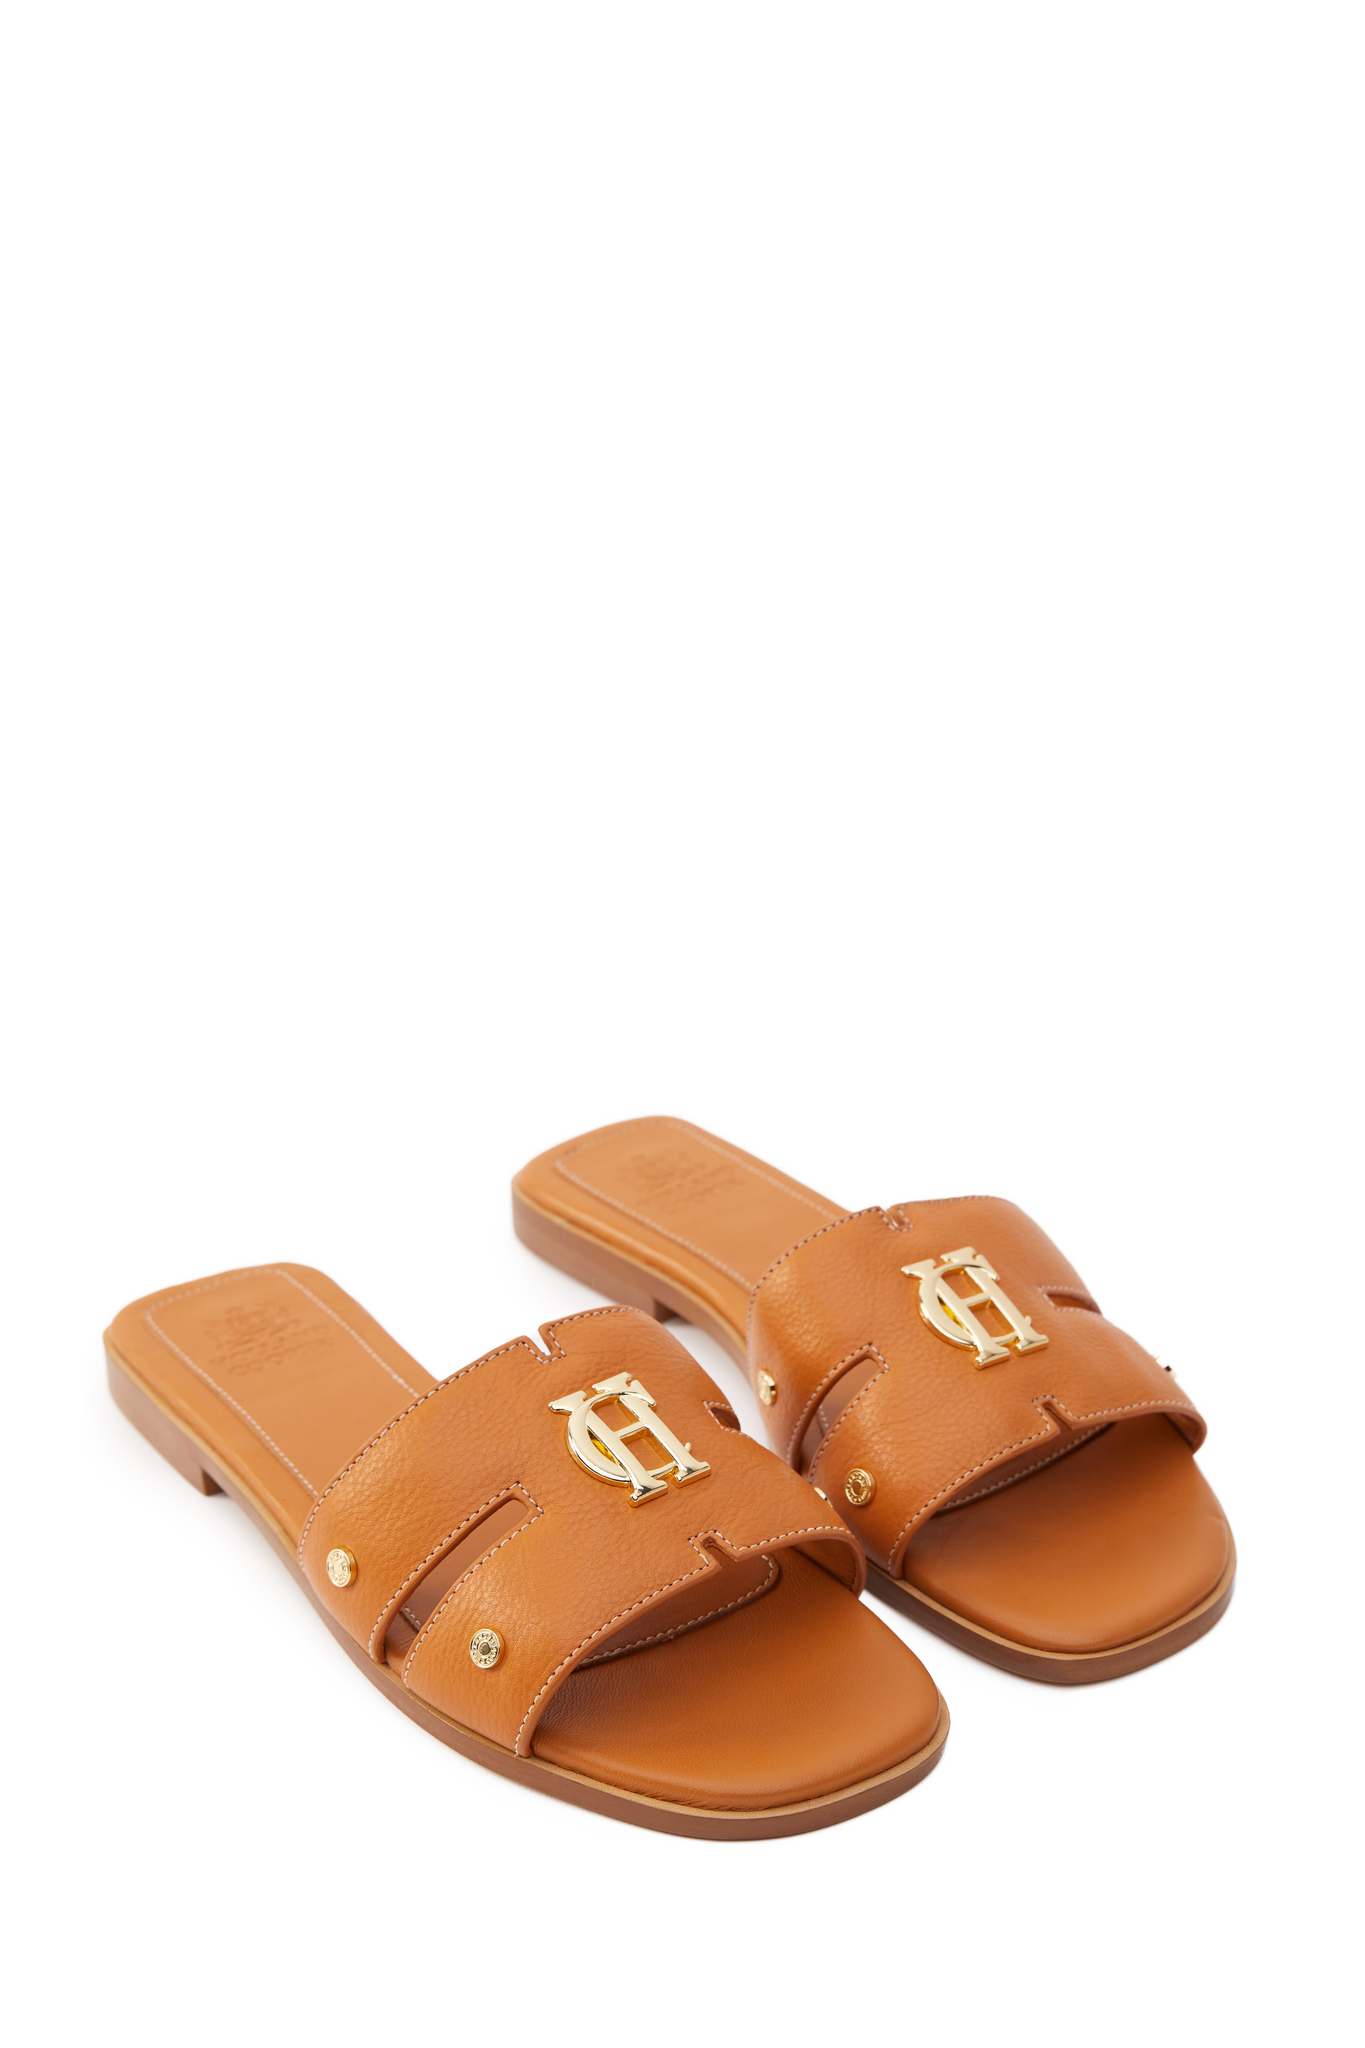 tan leather sliders with contrast white stitching, a tan leather sole and gold hardware